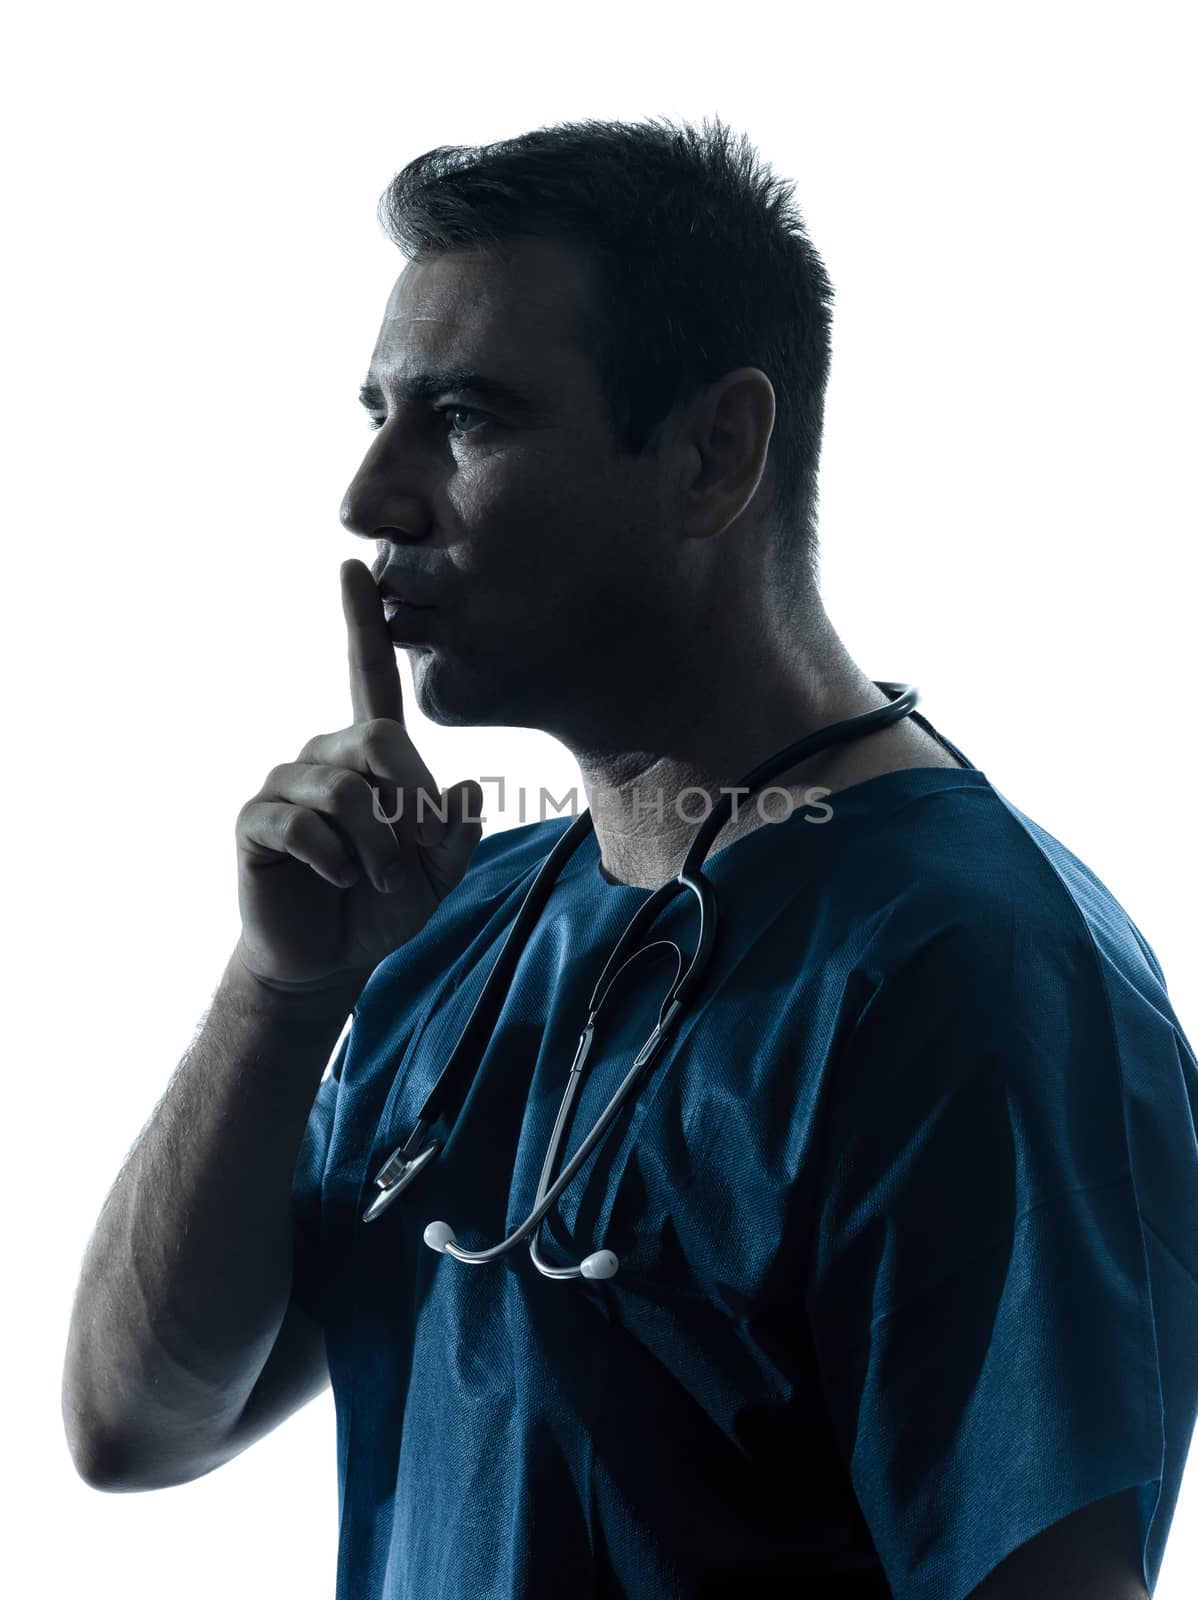 one caucasian man doctor surgeon hushing portrai medical worker silhouette isolated on white background